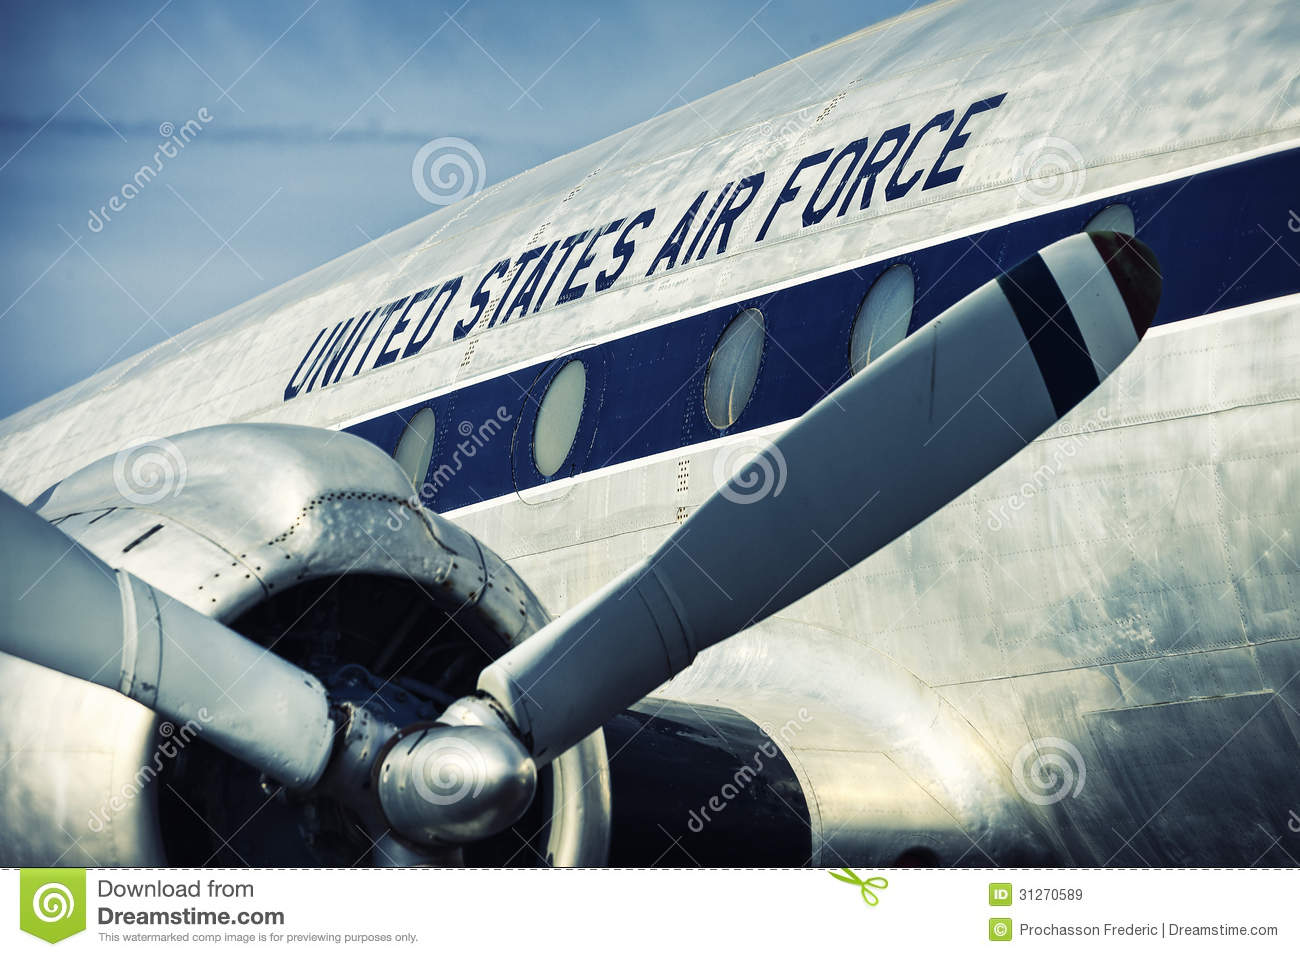 United States Air Force Royalty Free Stock Images   Image  31270589